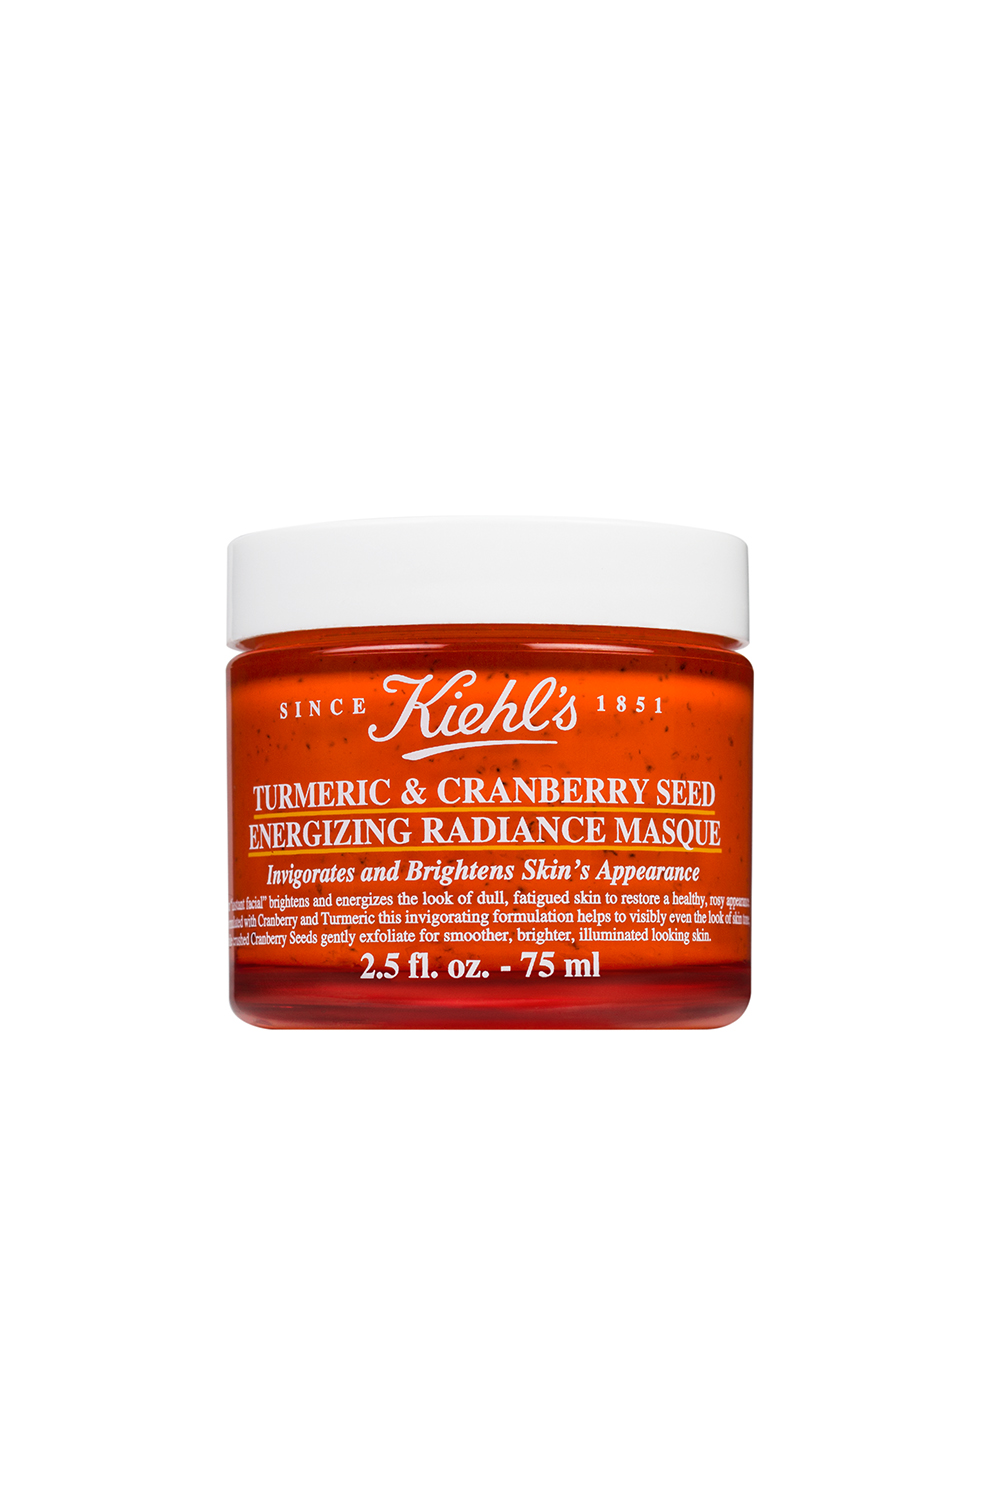 The masque: As well as a fabulous tightening effect, Kiehl’s Tumeric & Cranberry Masque, $65, uses our favourite winter spice to calm any redness while cranberry seeds gently polish the skin as it’s washed off.